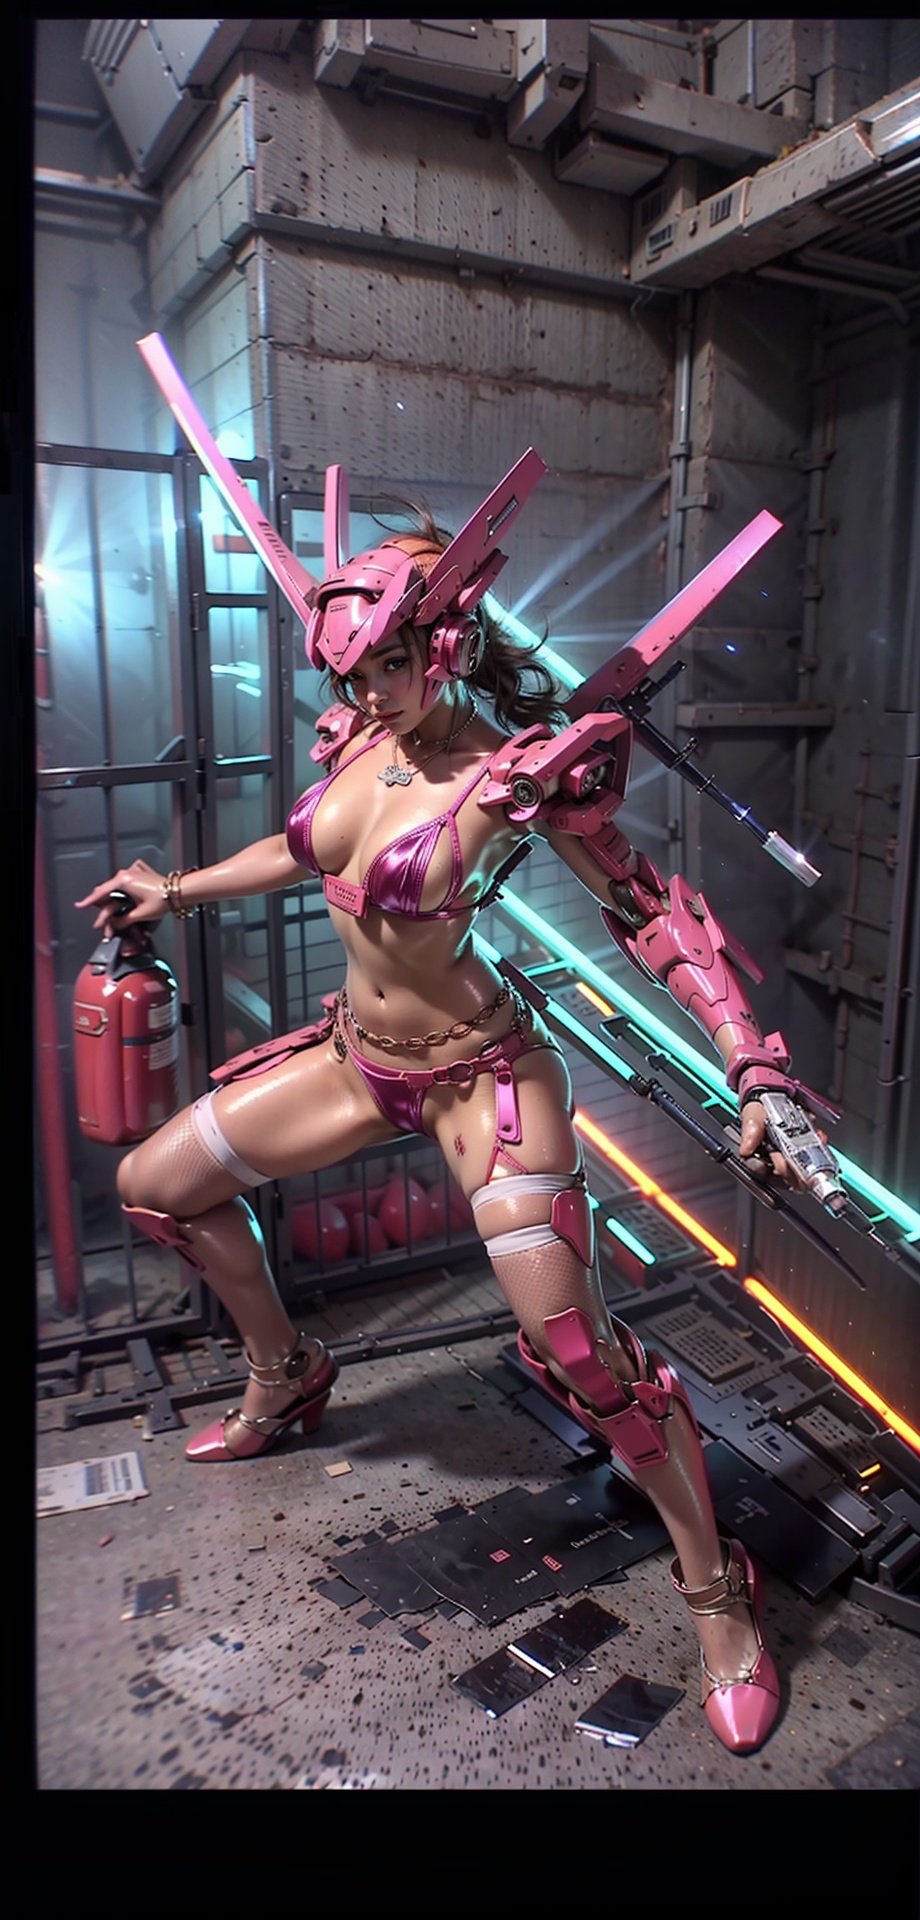 ((Birds view.)) Masterpiece, best quality, Ultra-high resolution, Realistic, sense of reality, The ultimate detail, 8K wallpaper, Professional lighting, Cyberpunk lights. Flame around armor.The perfect hand, Realistic hands, 1girl, solo, standing, full body, (long black hair:1.1), jixieji, Wearing a mecha, mechanical joint, dynamic posture, Universe, Earth, machinery, Heela collections, Mecha girl sexaroid, Chain link fence, ((dynamic pose)), blue_jijiaS, fbot, mecha, Pink Mecha, Mecha girl figure, Honey Mecha, Mecha warrior, Mecha, CYBER PUNK, Gundam, rx78, girl, detail, GTS, Real, 1GIRL, science fiction, Mechagirl, Girl. Giantess standing on the city. She is 200 meters higher than the building., bird 's-eye view, fantastic atmosphere, river. Hold a plane in the hands. Small trucks and human beings around the Giantess., river, fantastic sense of light. Holding a larger laser gun, fight with monsters.,  greendesign,  Hourglass body shape, orange, Sagittariusarmor, mechaarmor,  jellyfish, Dancing, bikini, <lora:EMS-459-EMS:0.600000>, , <lora:EMS-604-EMS:0.400000>, , <lora:EMS-7421-EMS:0.300000>, , <lora:EMS-14488-EMS:0.800000>, , <lora:EMS-82536-EMS:0.800000>